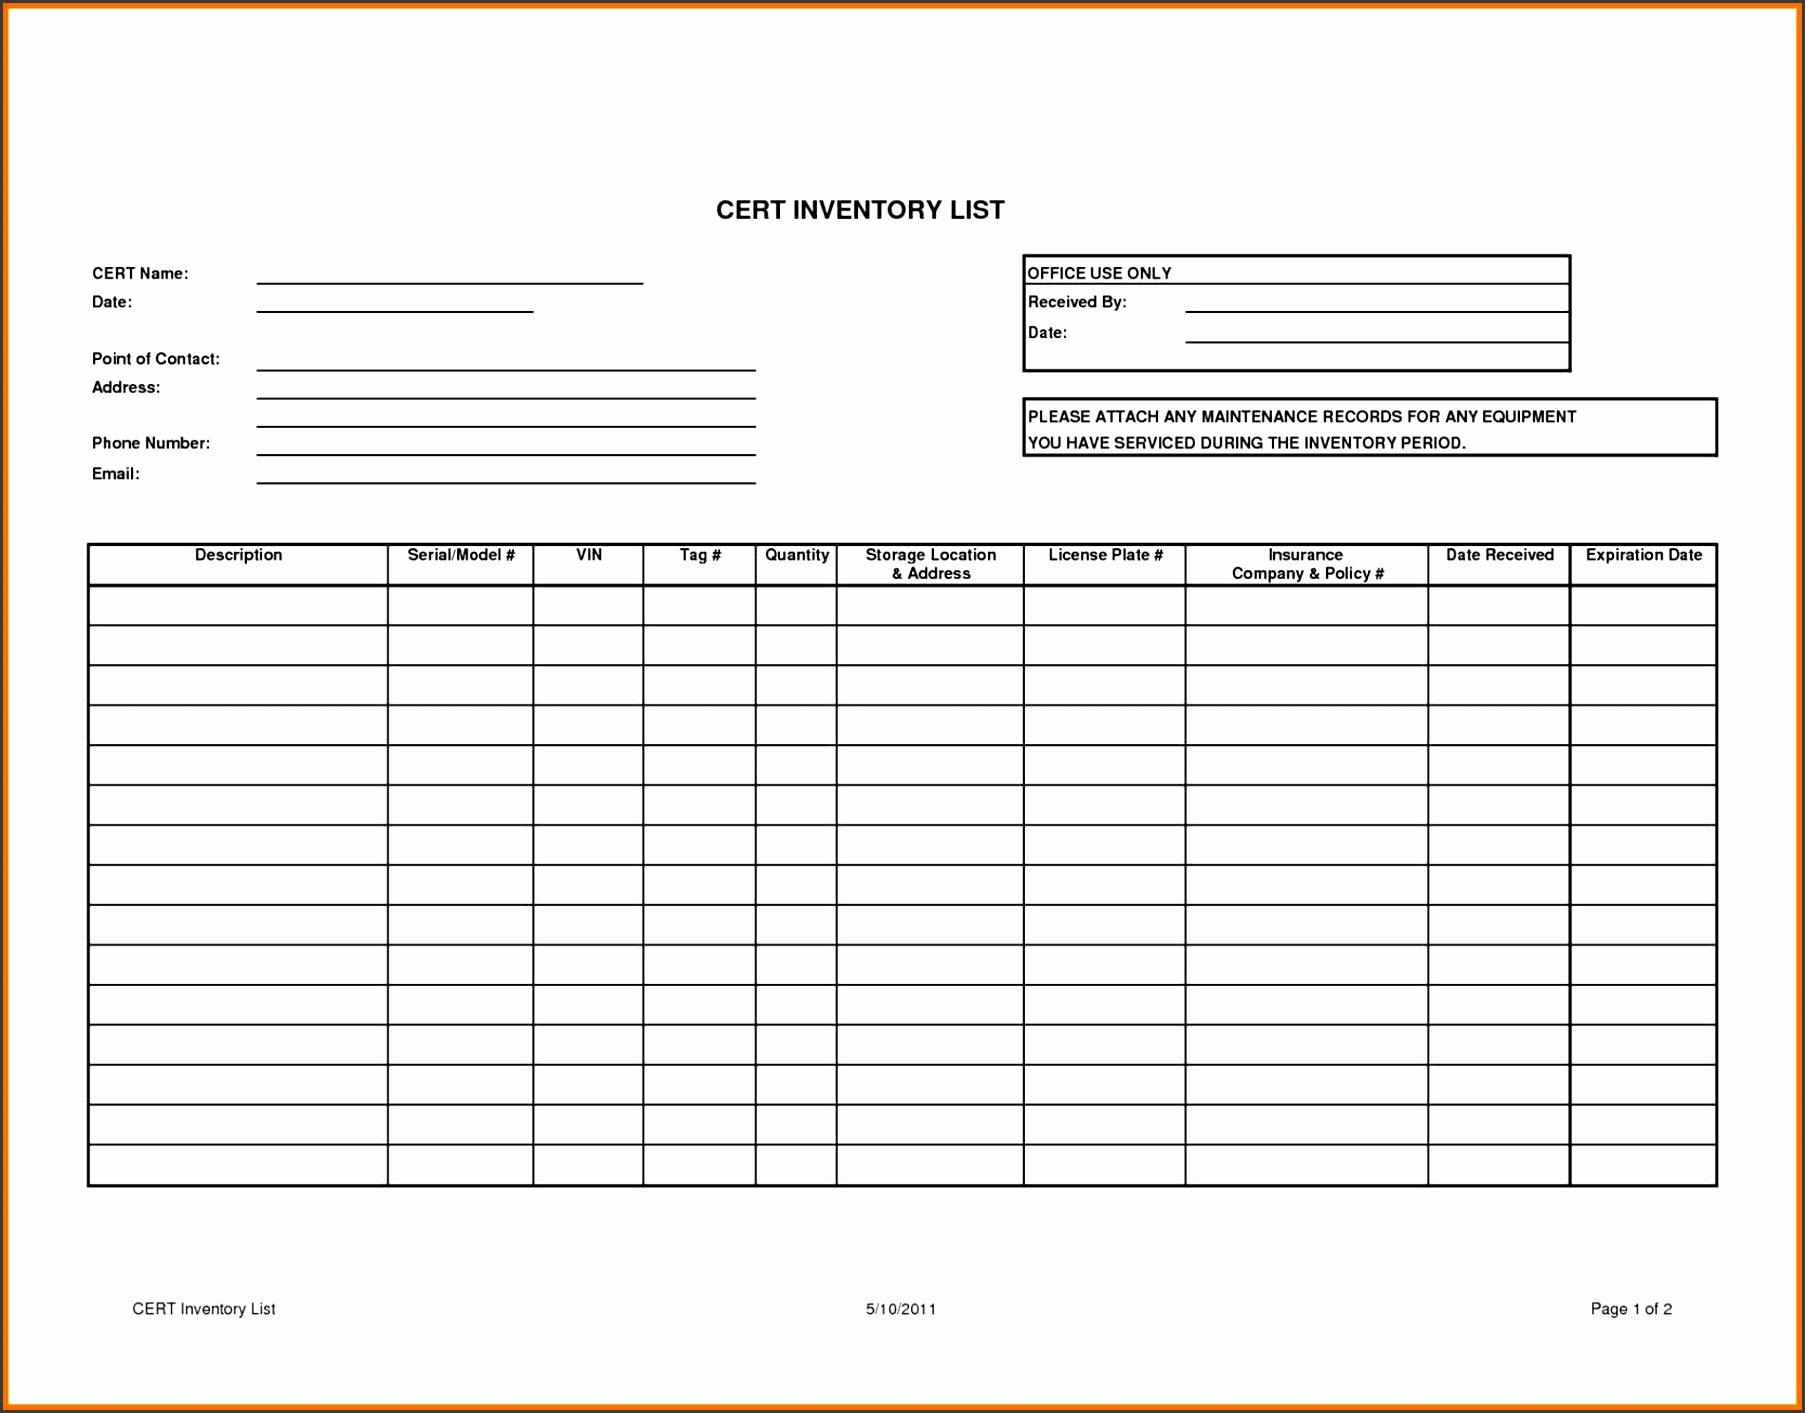 Supplies Basic fice Janitorial Cleaning Checklist Template In Template Best s Best Medical fice Supplies List s Inventory Template Free